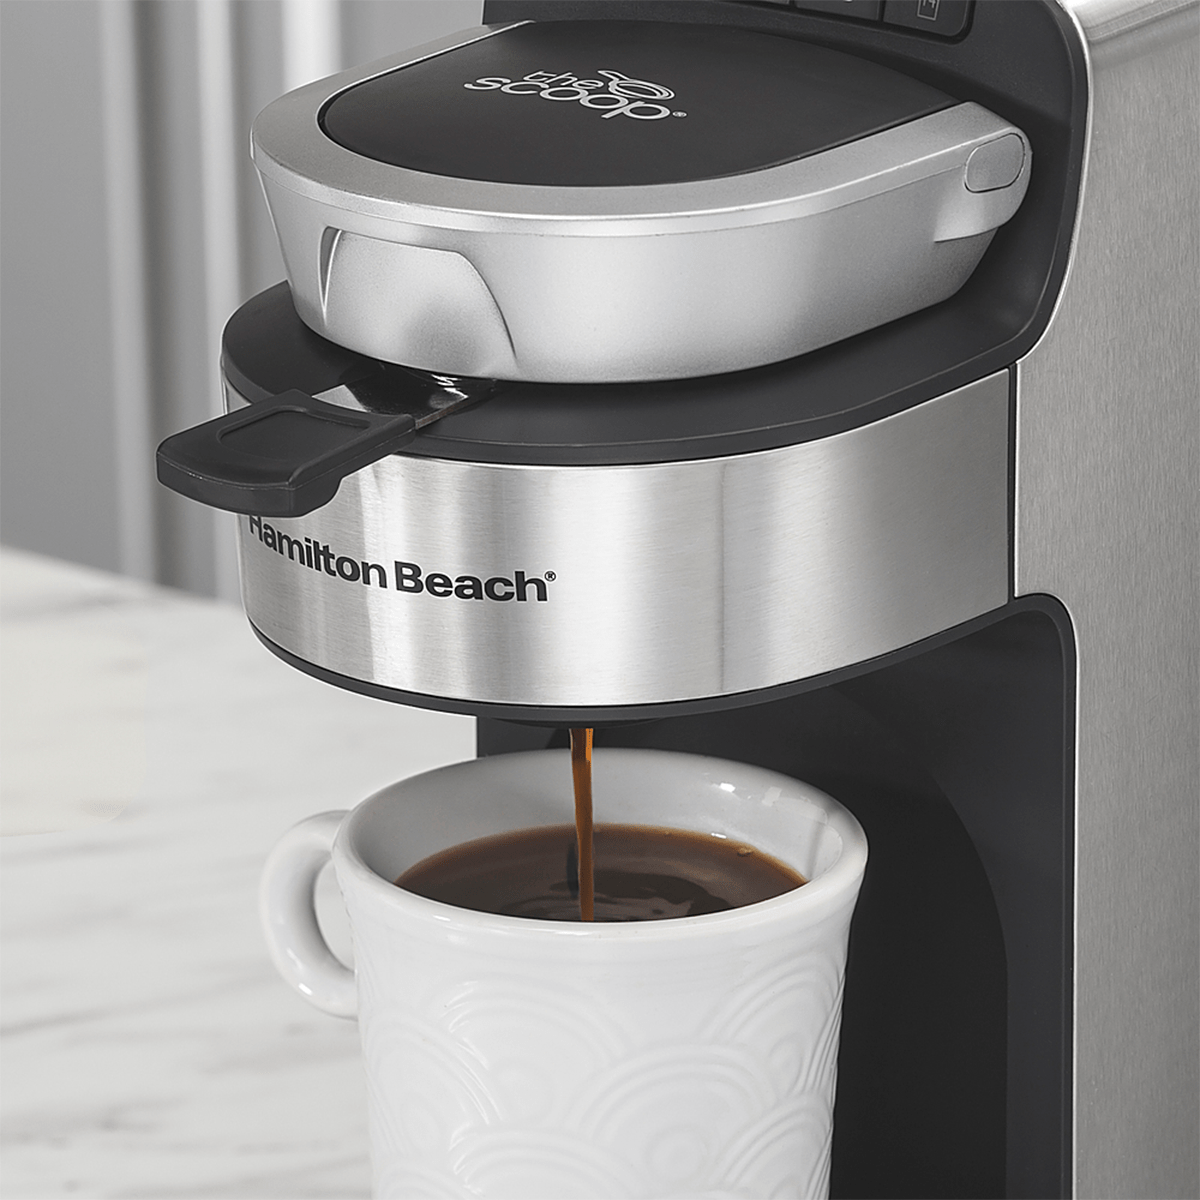 Our review of the Hamilton Beach Single Serve Scoop Coffee Maker